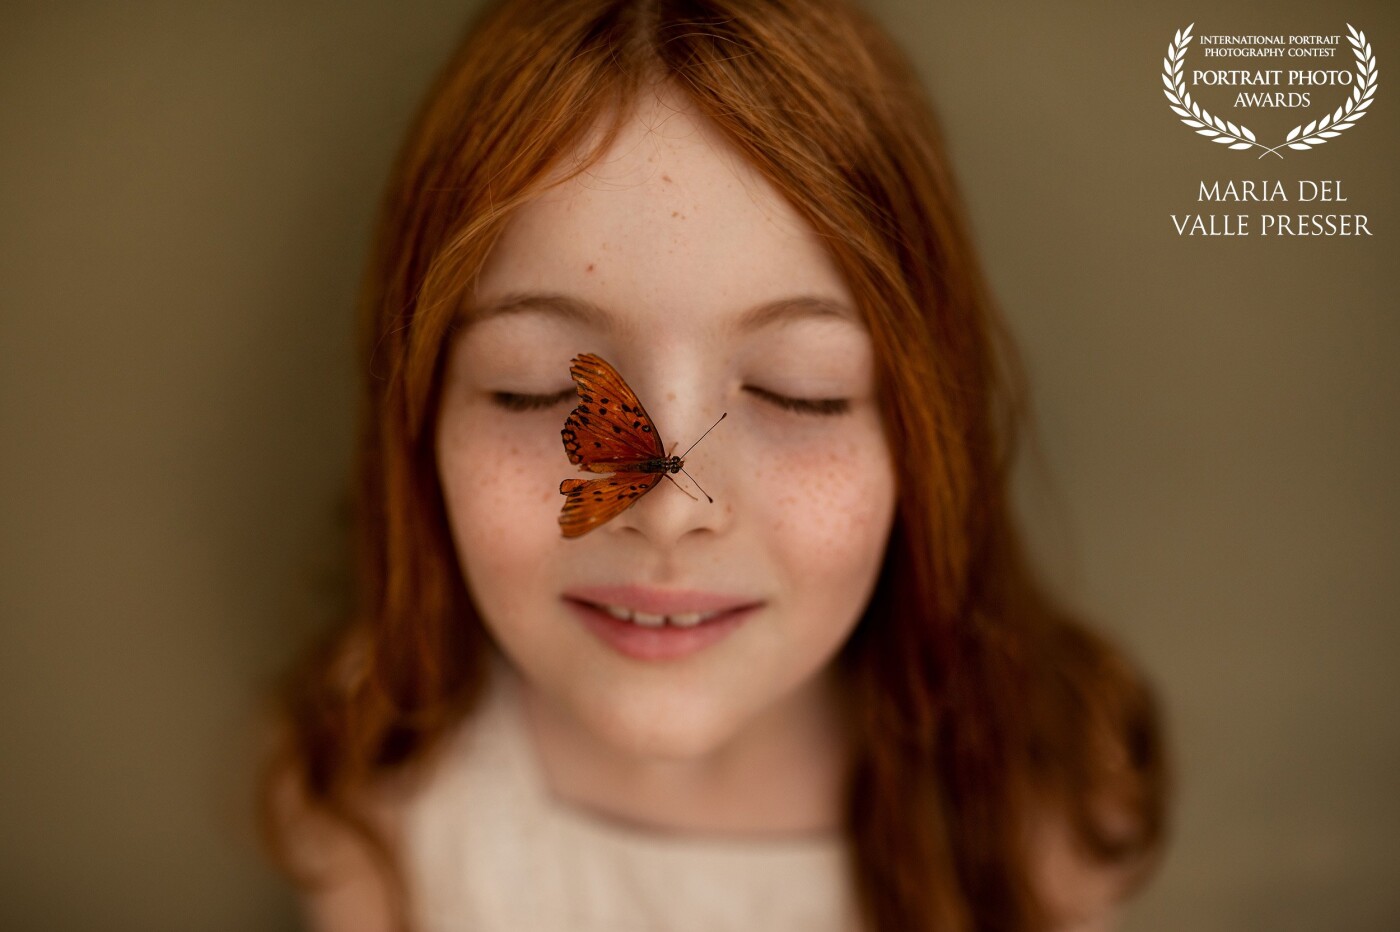 I took this photo during my family vacation in Neuquén, Argentina. My daughters who live in an apartment during the year were enjoying the outdoors and nature. One day we found a butterfly that could no longer fly because its wing was broken. There I thought that there are many things that despite being broken are still beautiful.